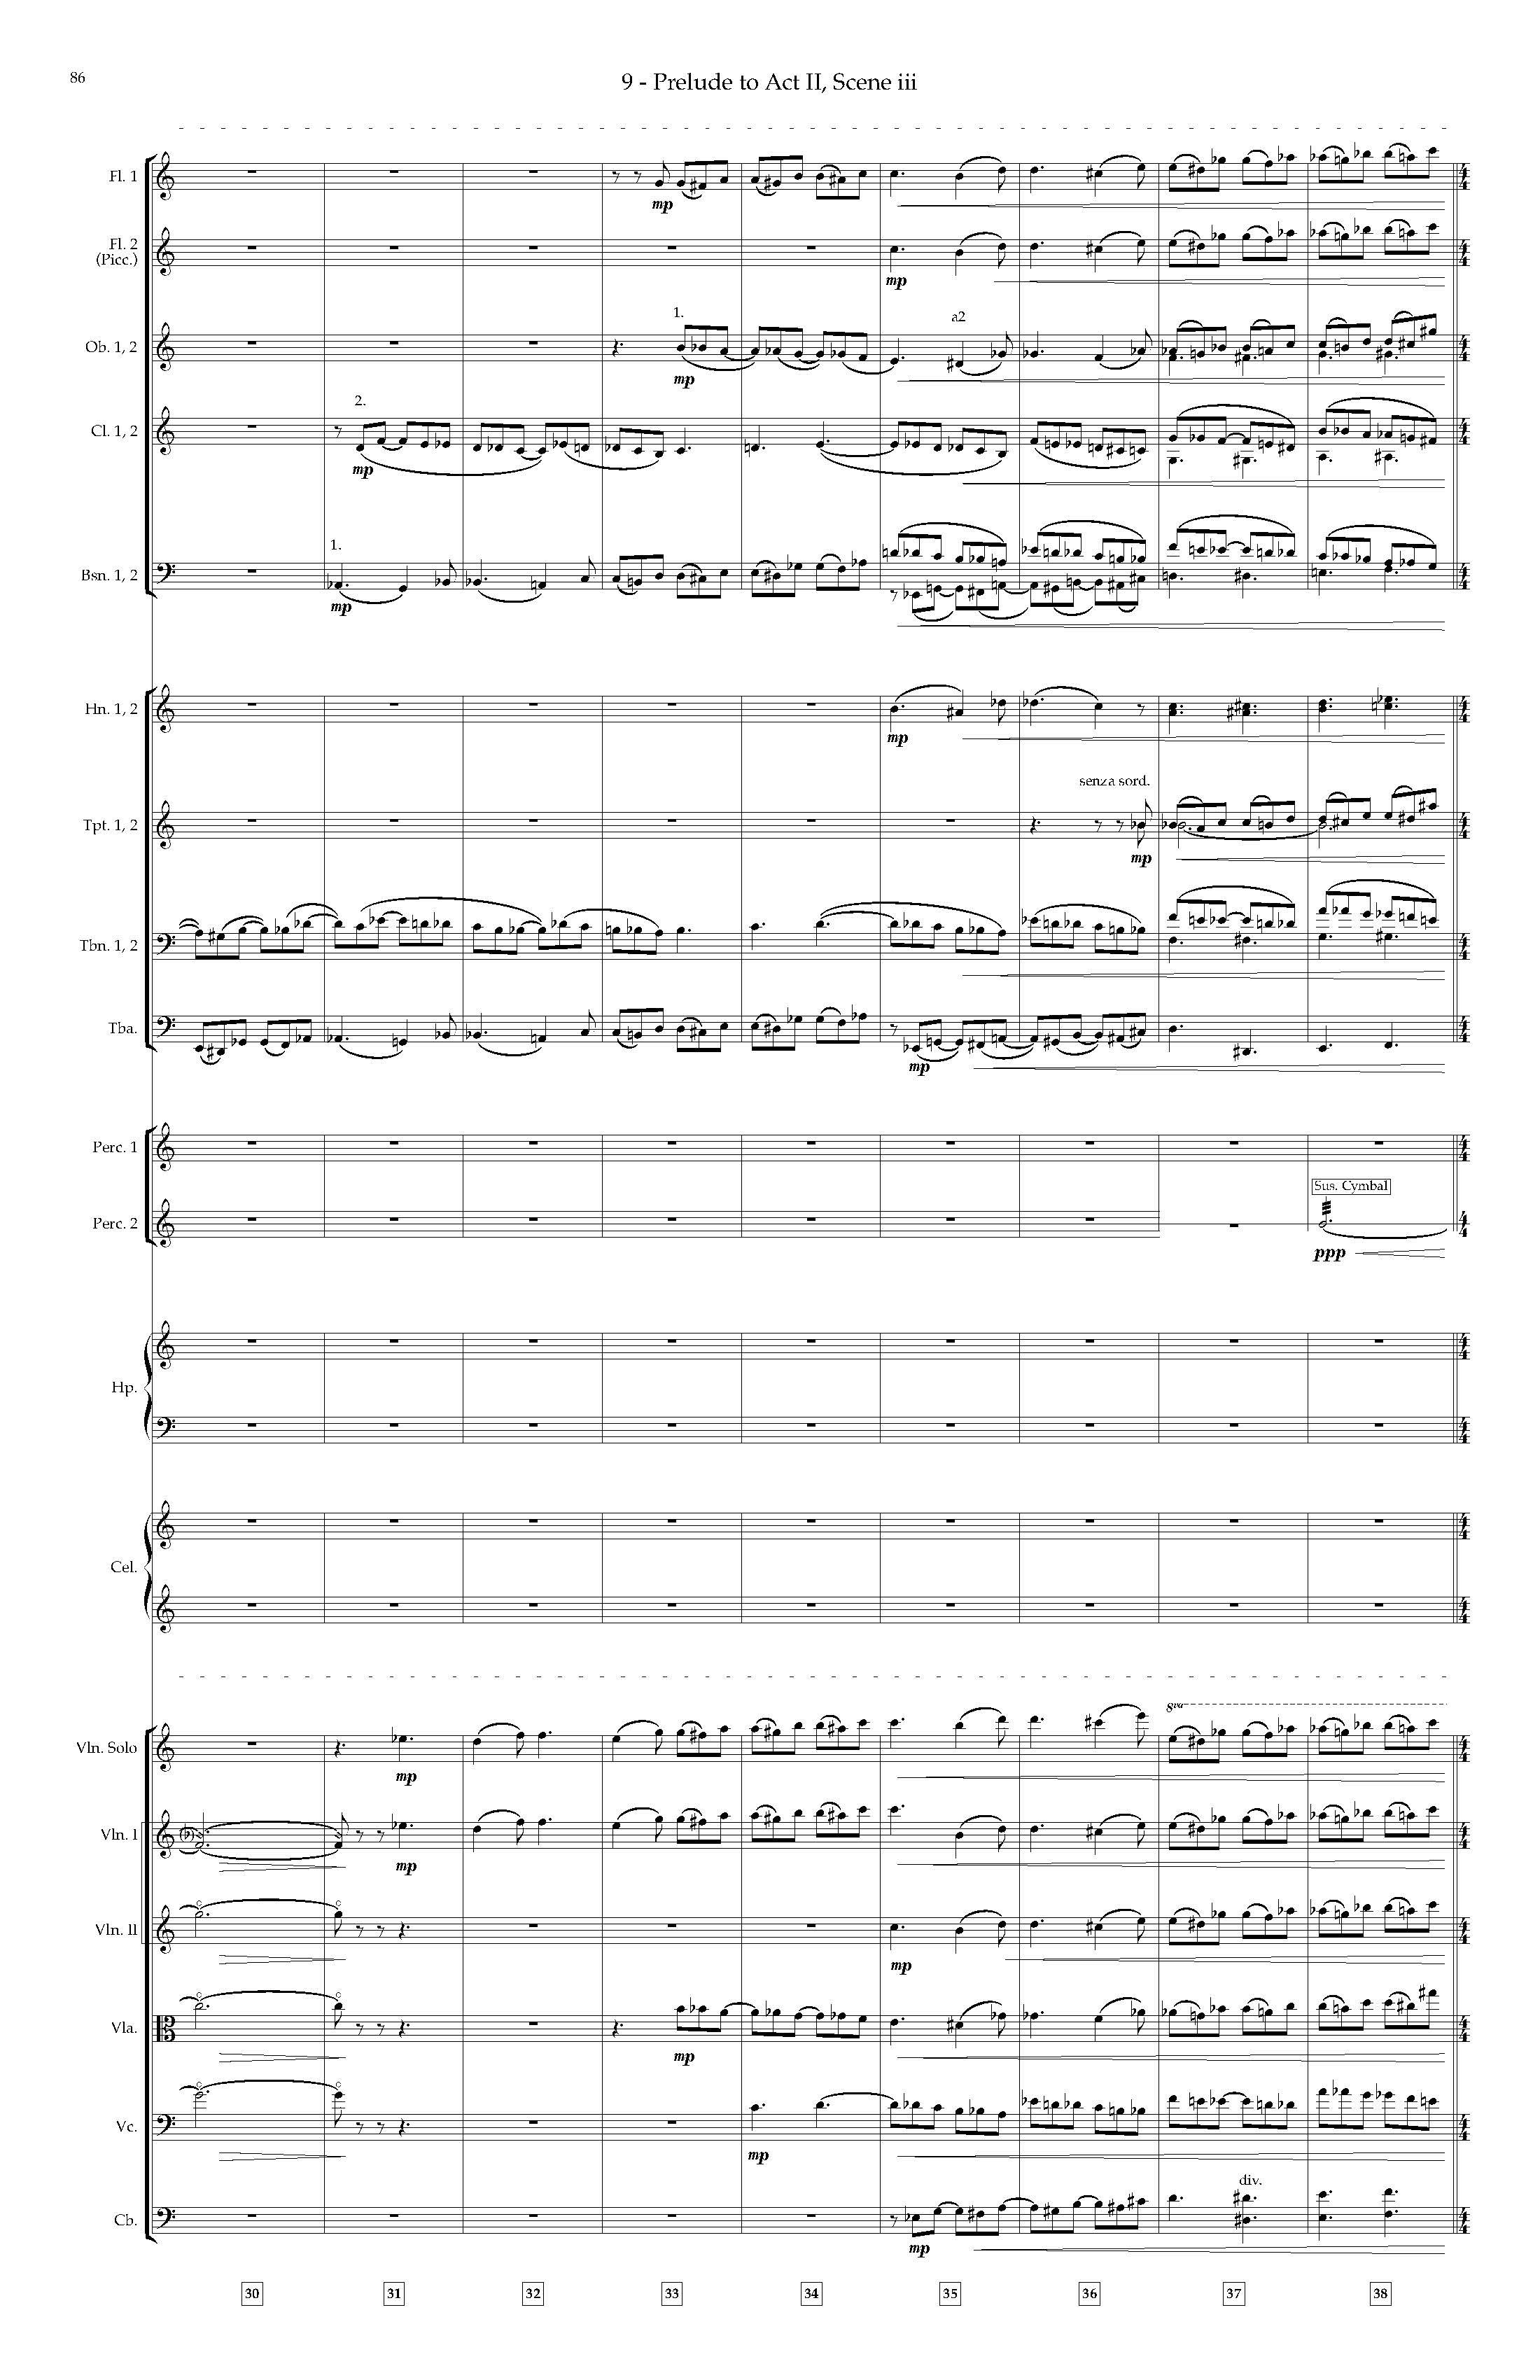 Arias and Interludes from HWGS - Complete Score_Page_92.jpg